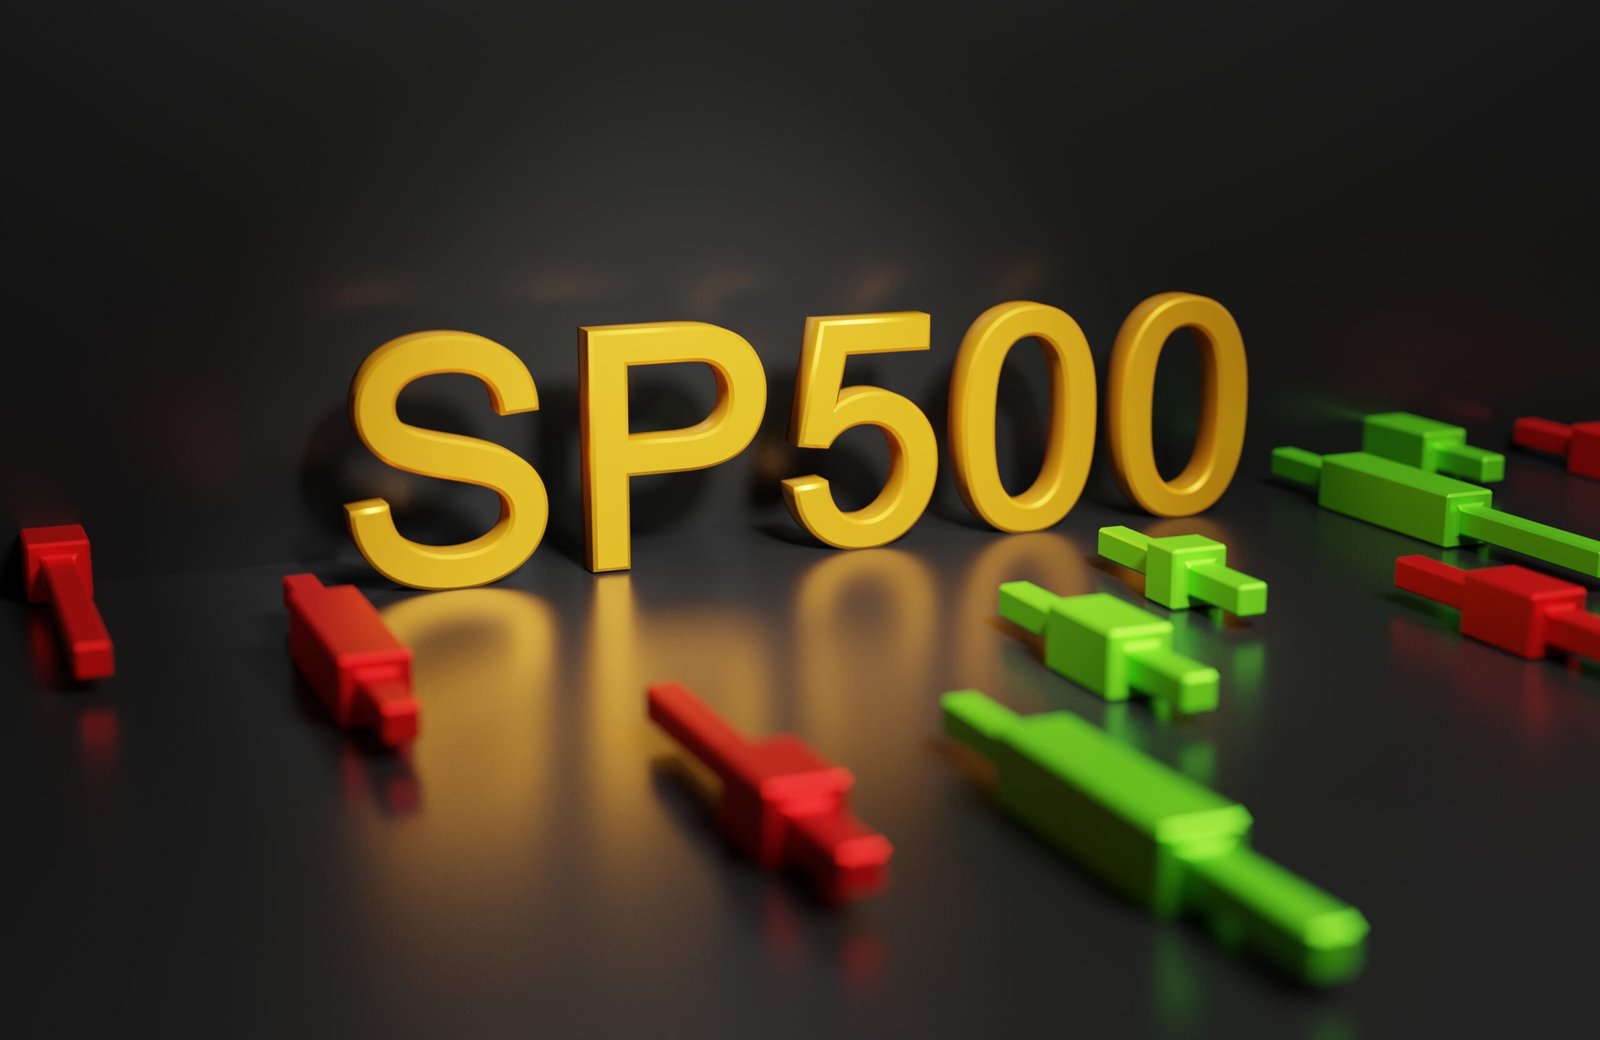 The,Sp,500,Stock,Index,On,A,Dark,Background,With